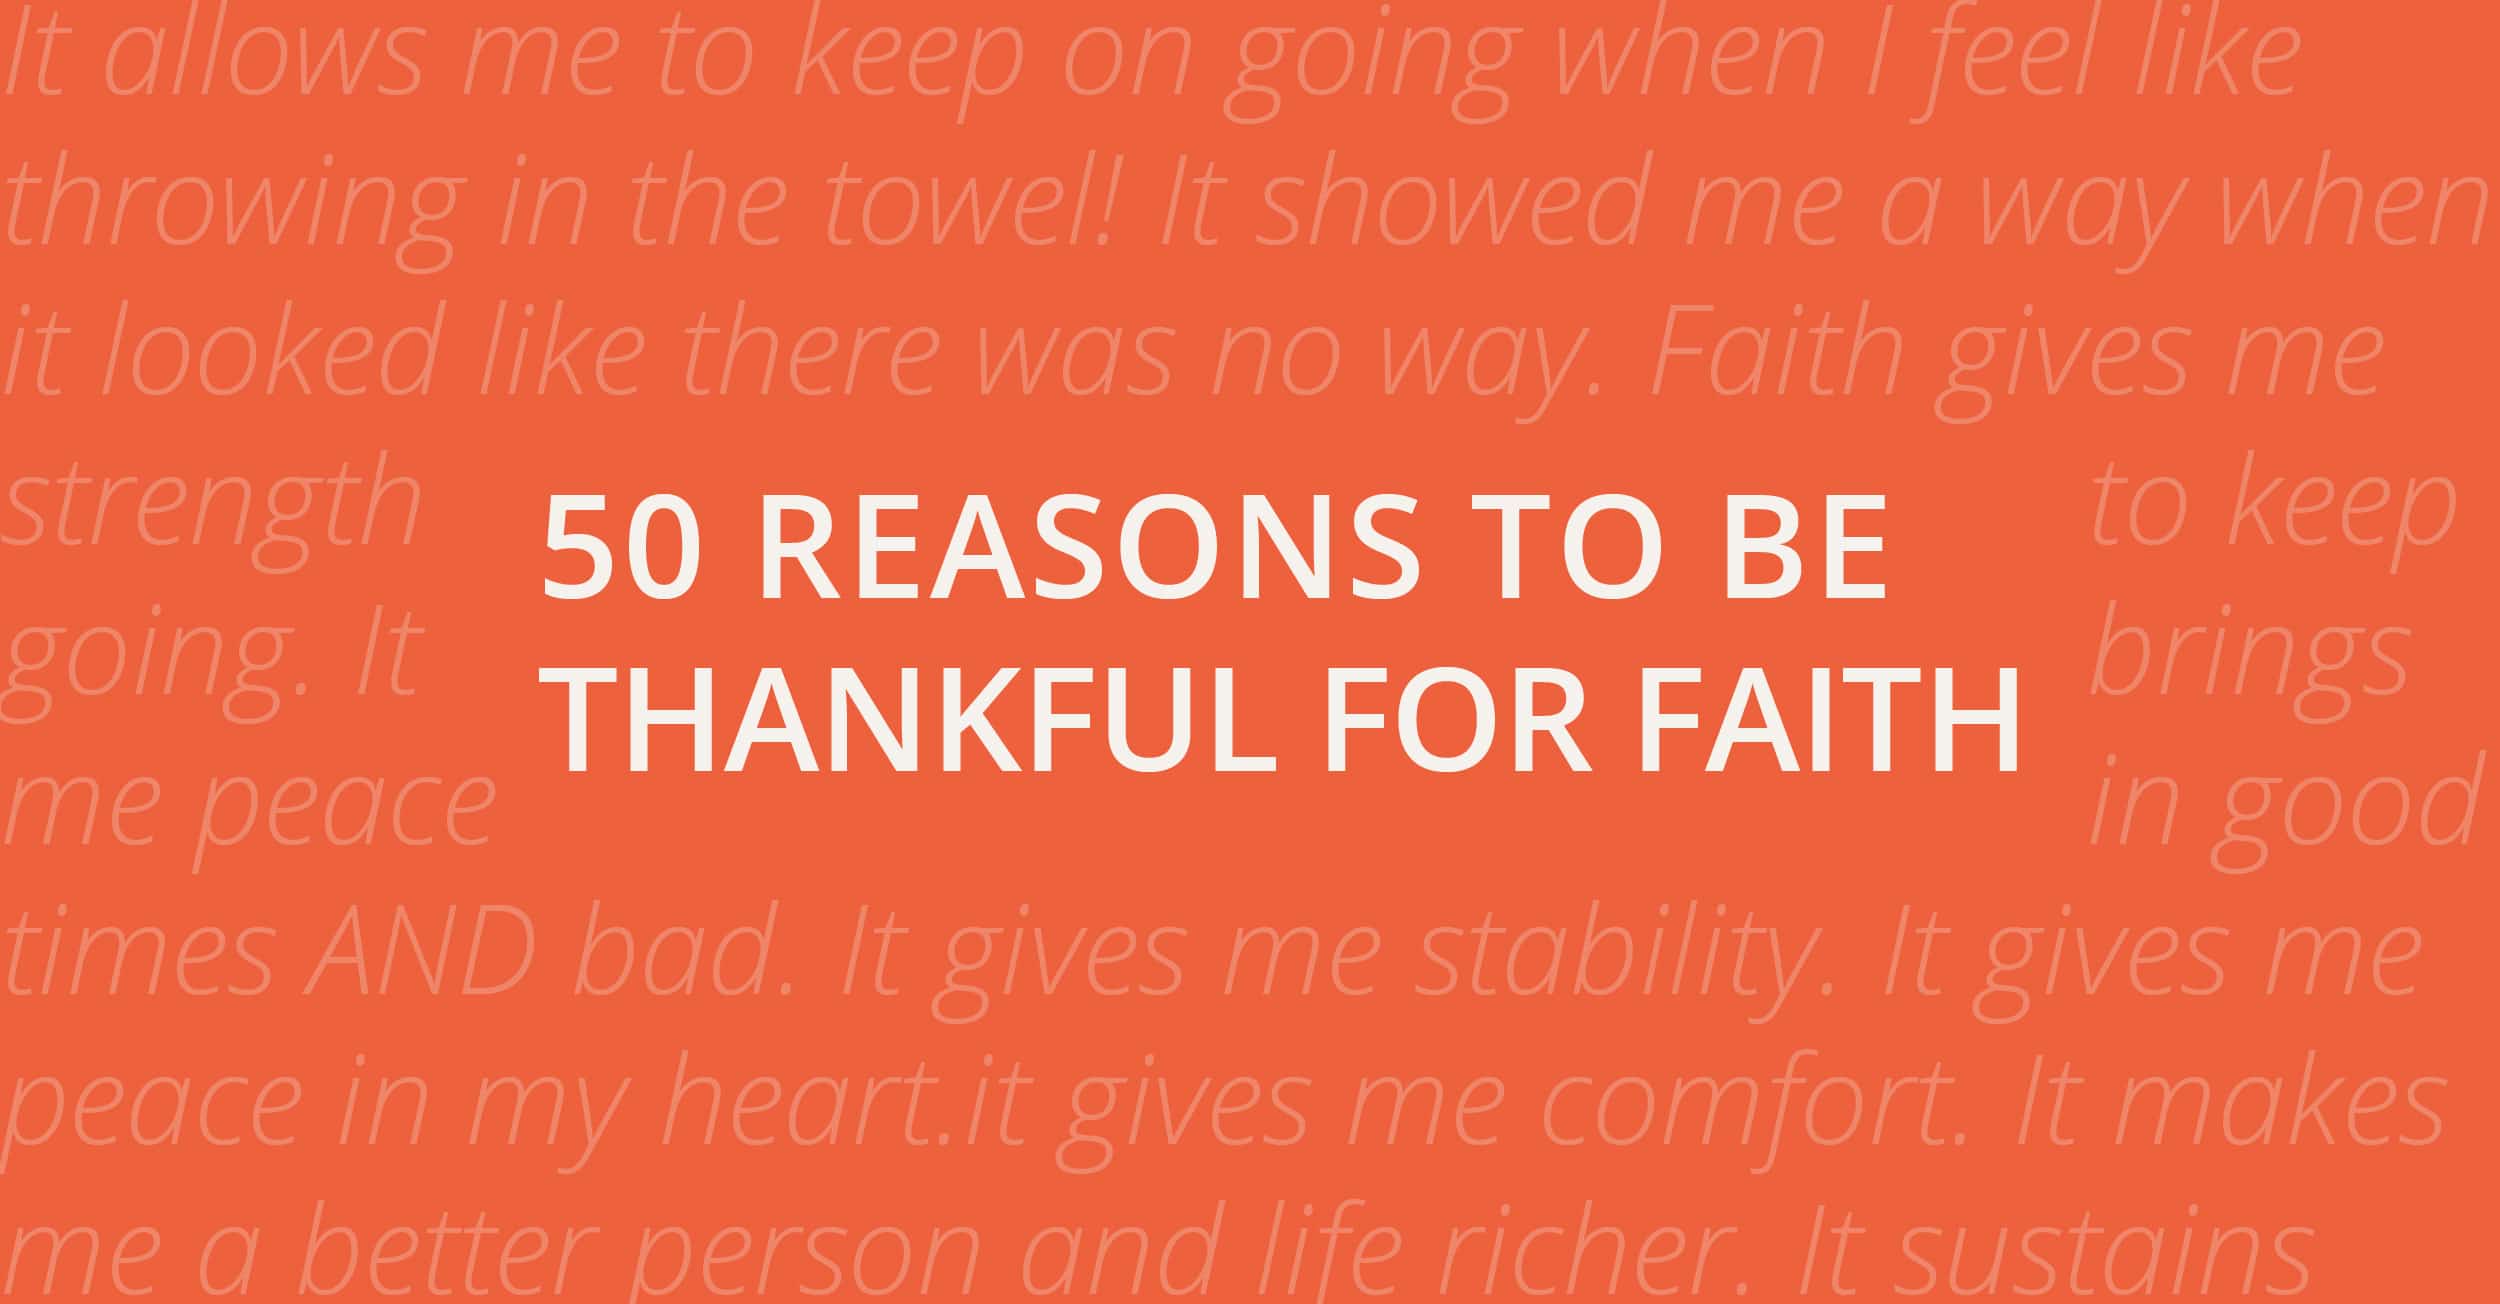 50 Reasons to be Thankful for Faith